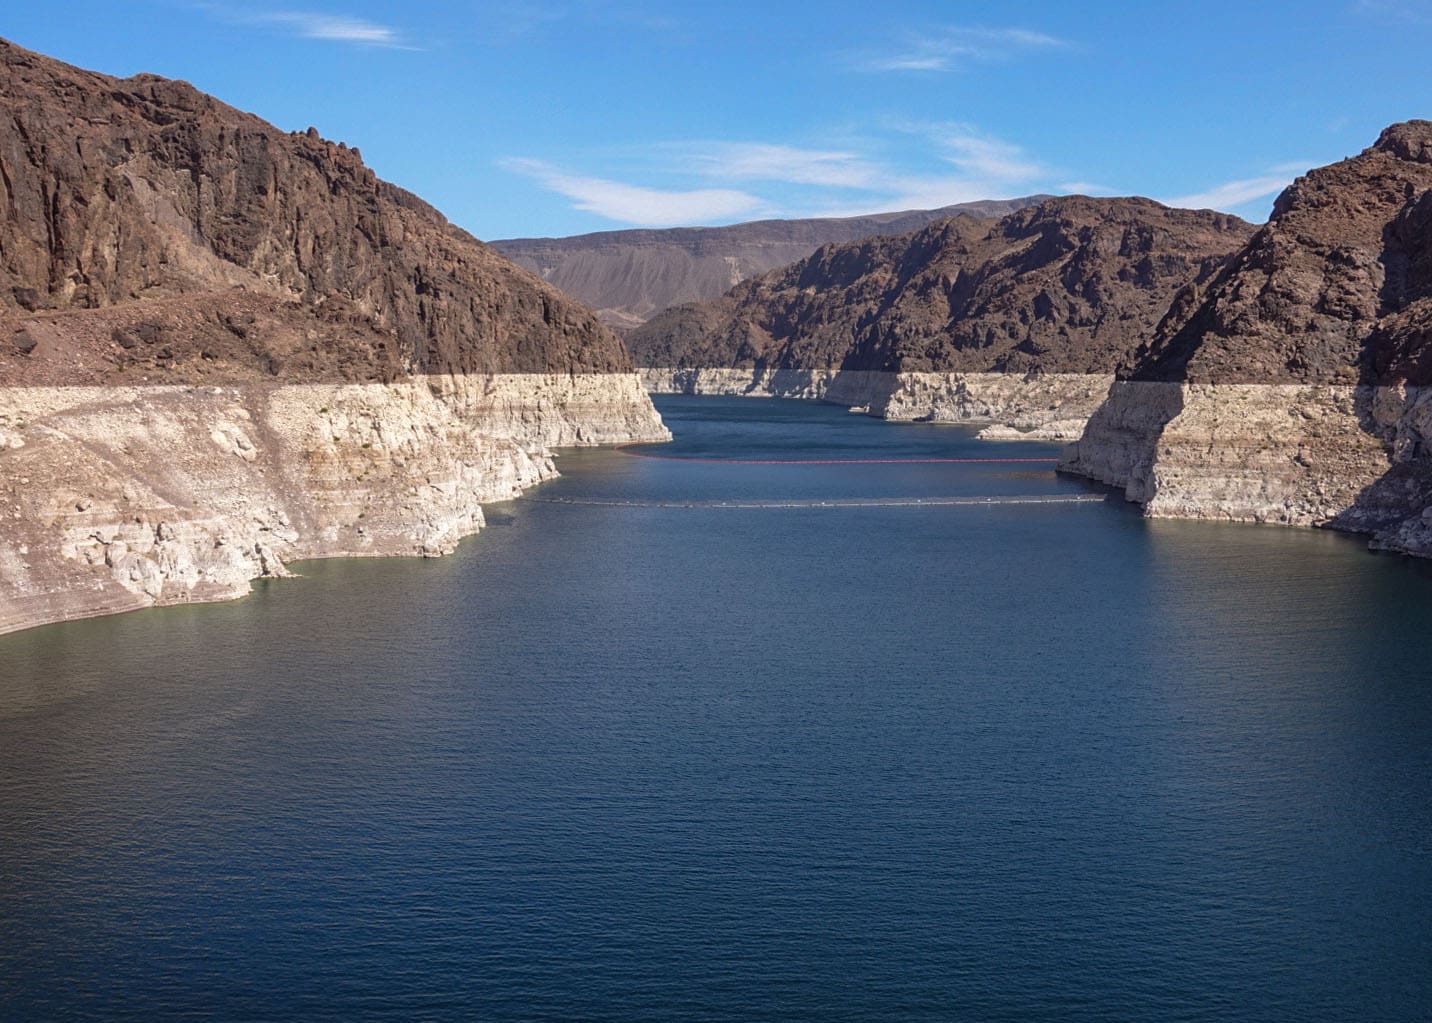 Photo of Lake Mead with visible low water levels.